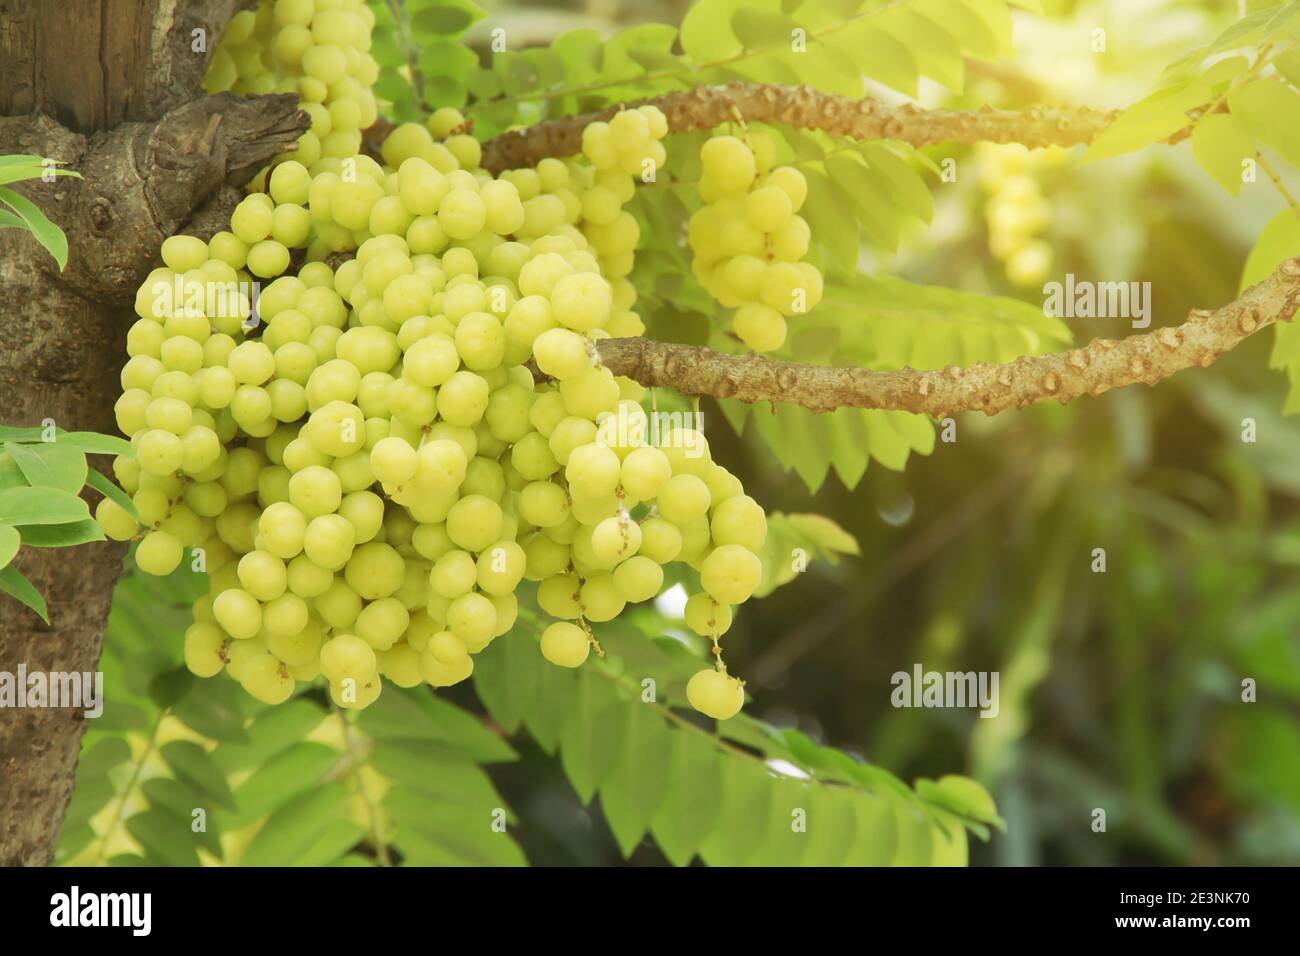 Bunch of Phyllanthus acidus, Star Gooseberry Fruits on Its Tree Stock Photo